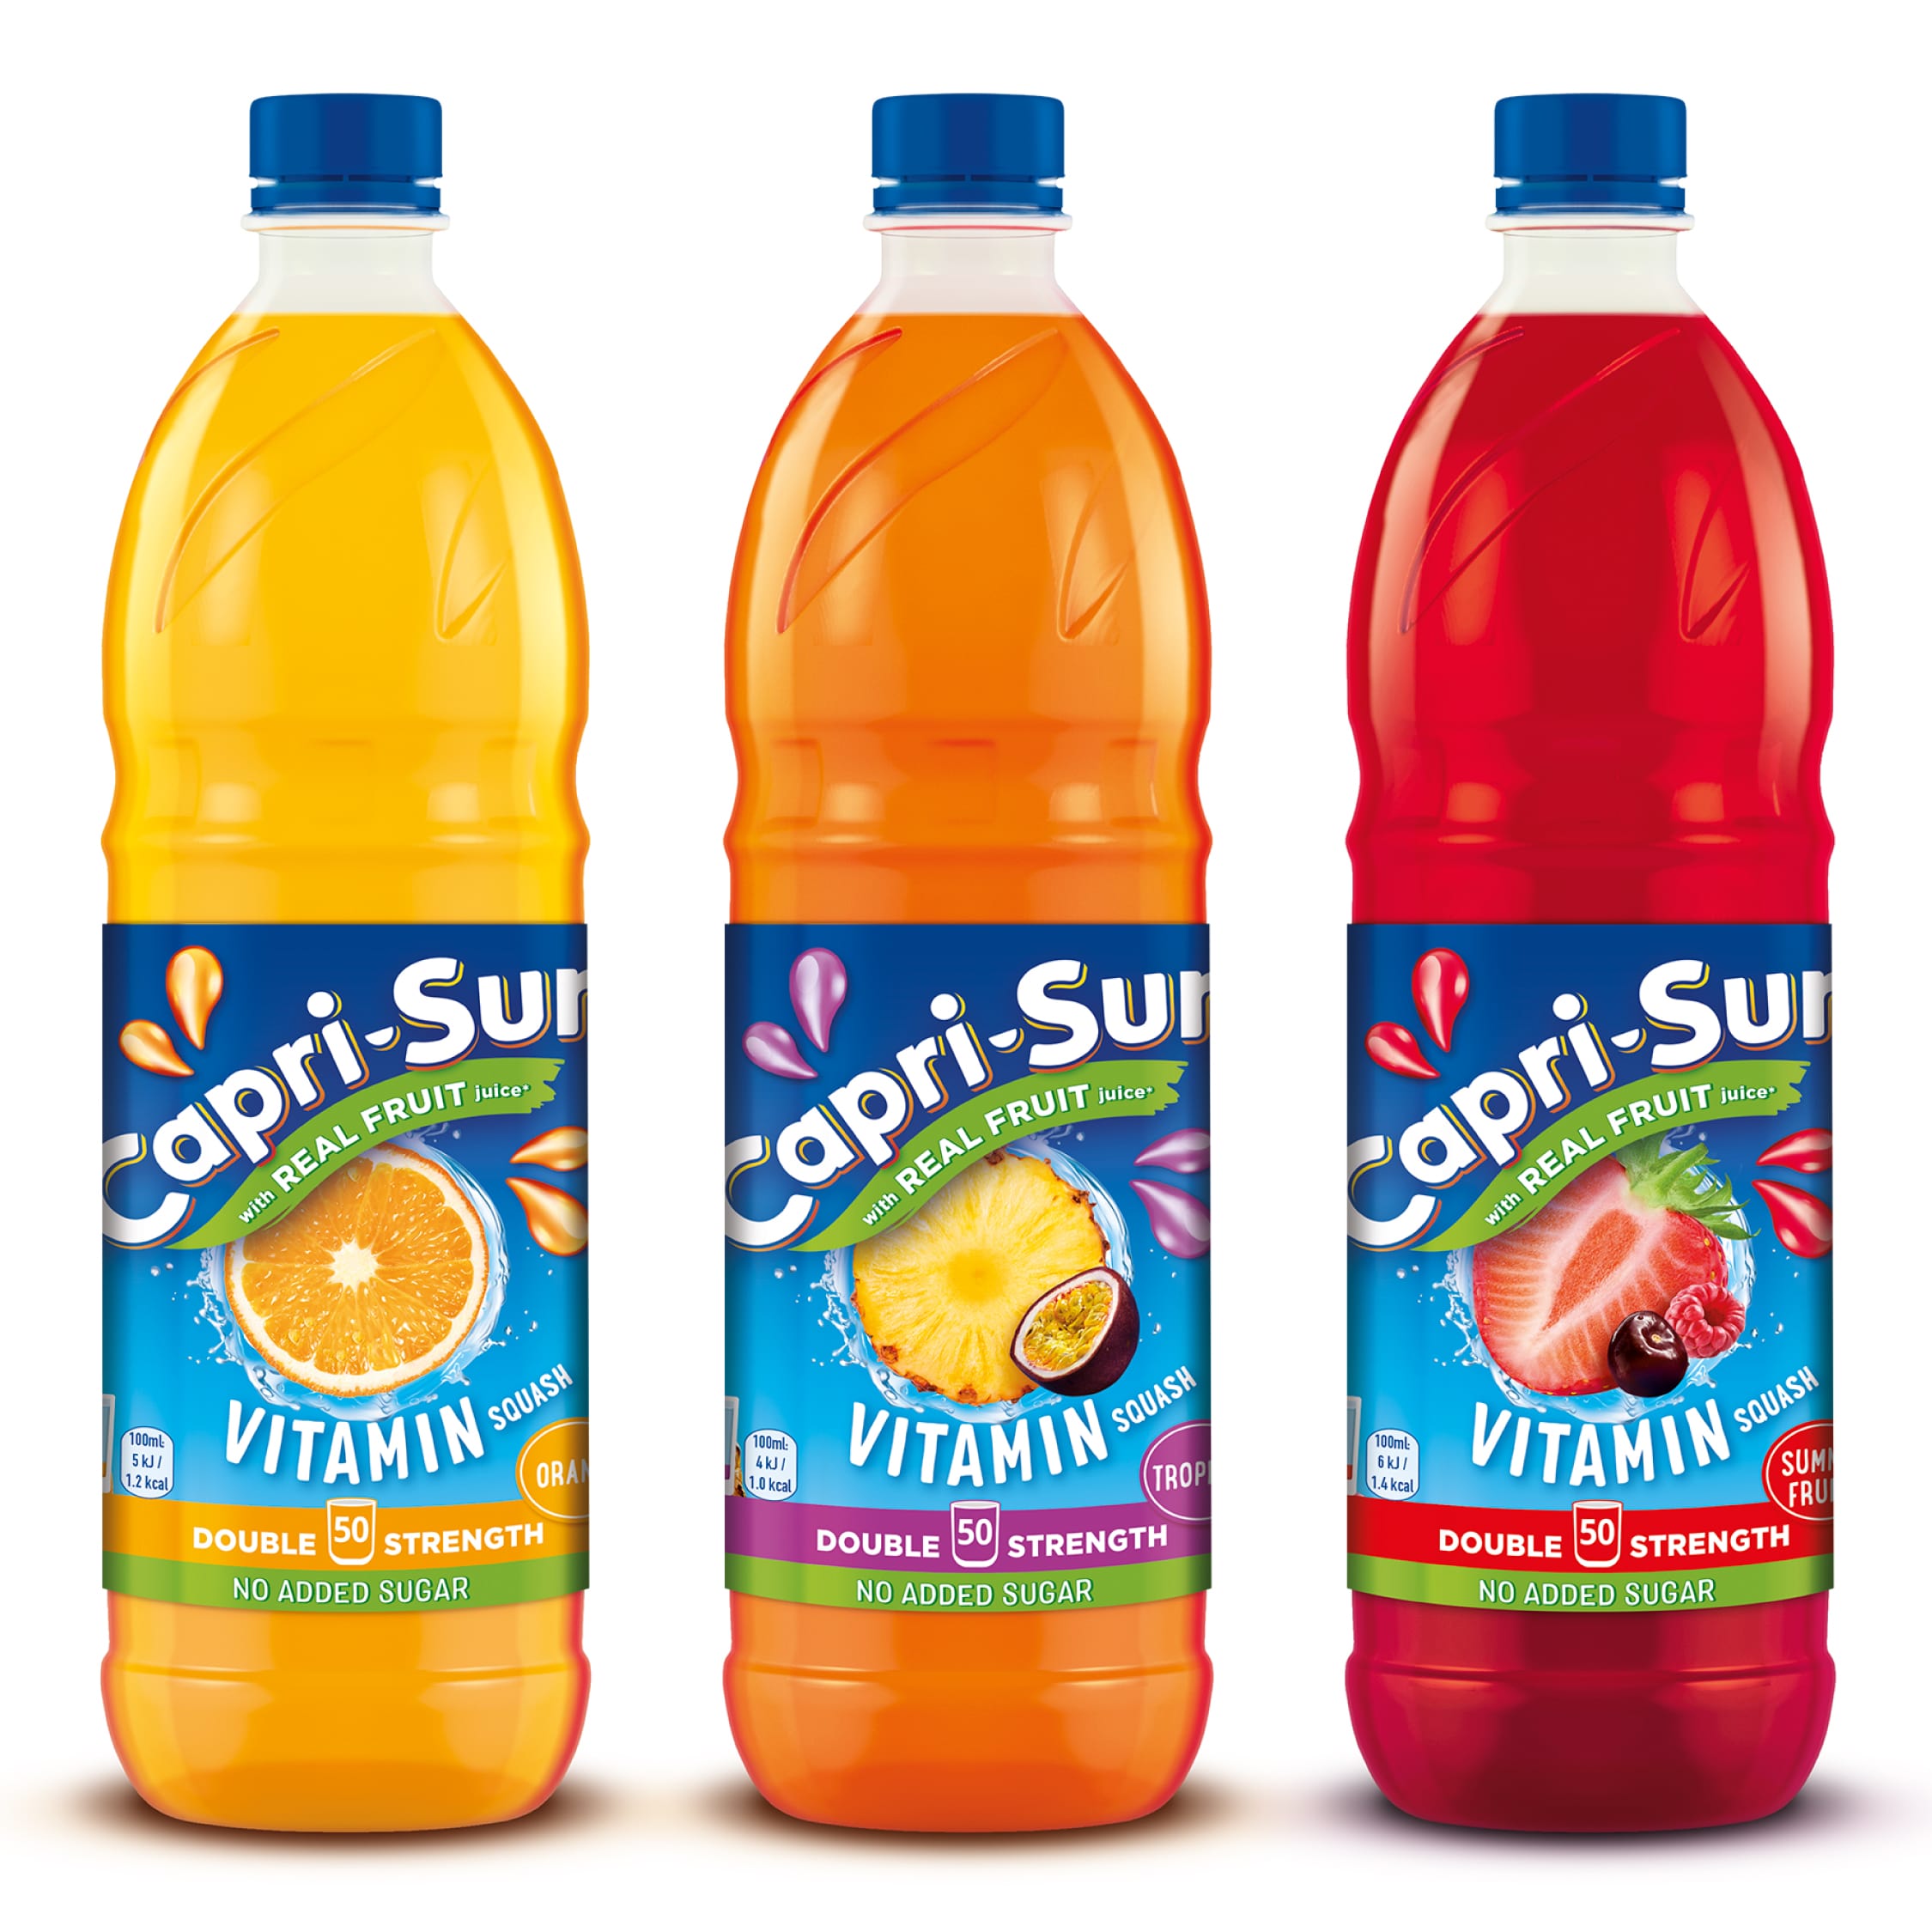 Capri-Sun unveils refreshed pack design with new squash offering